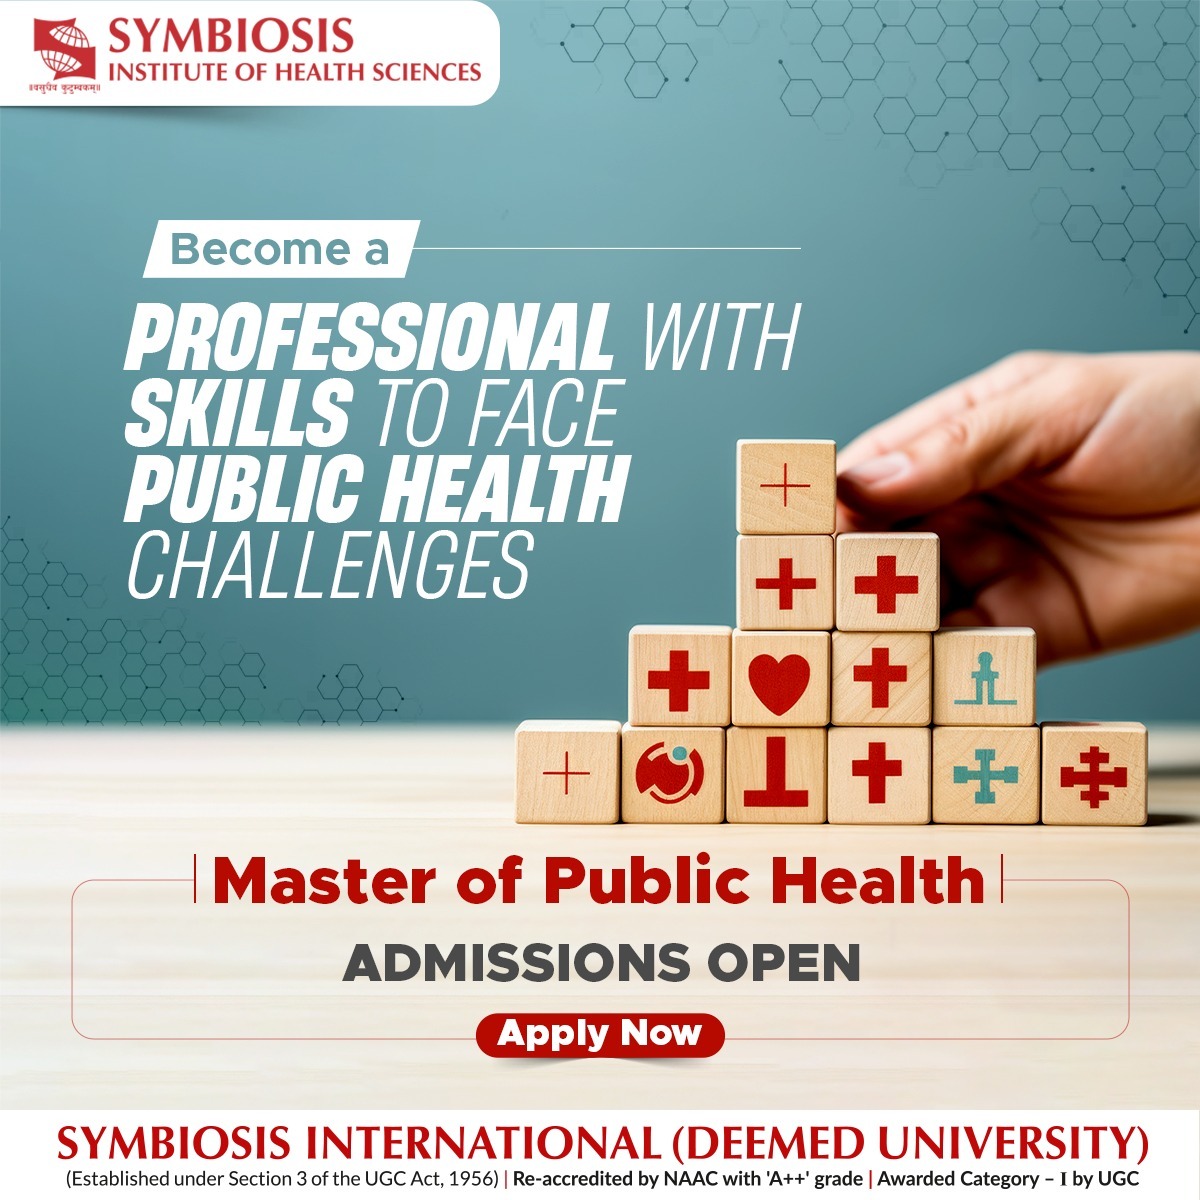 From epidemiology to Community Health initiatives, Master of Public Health programme Symbiosis Institute of Health Scienceswill arm you with skills to tackle community health issues worldwide. Join us in our mission to create a healthier, more equitable world.